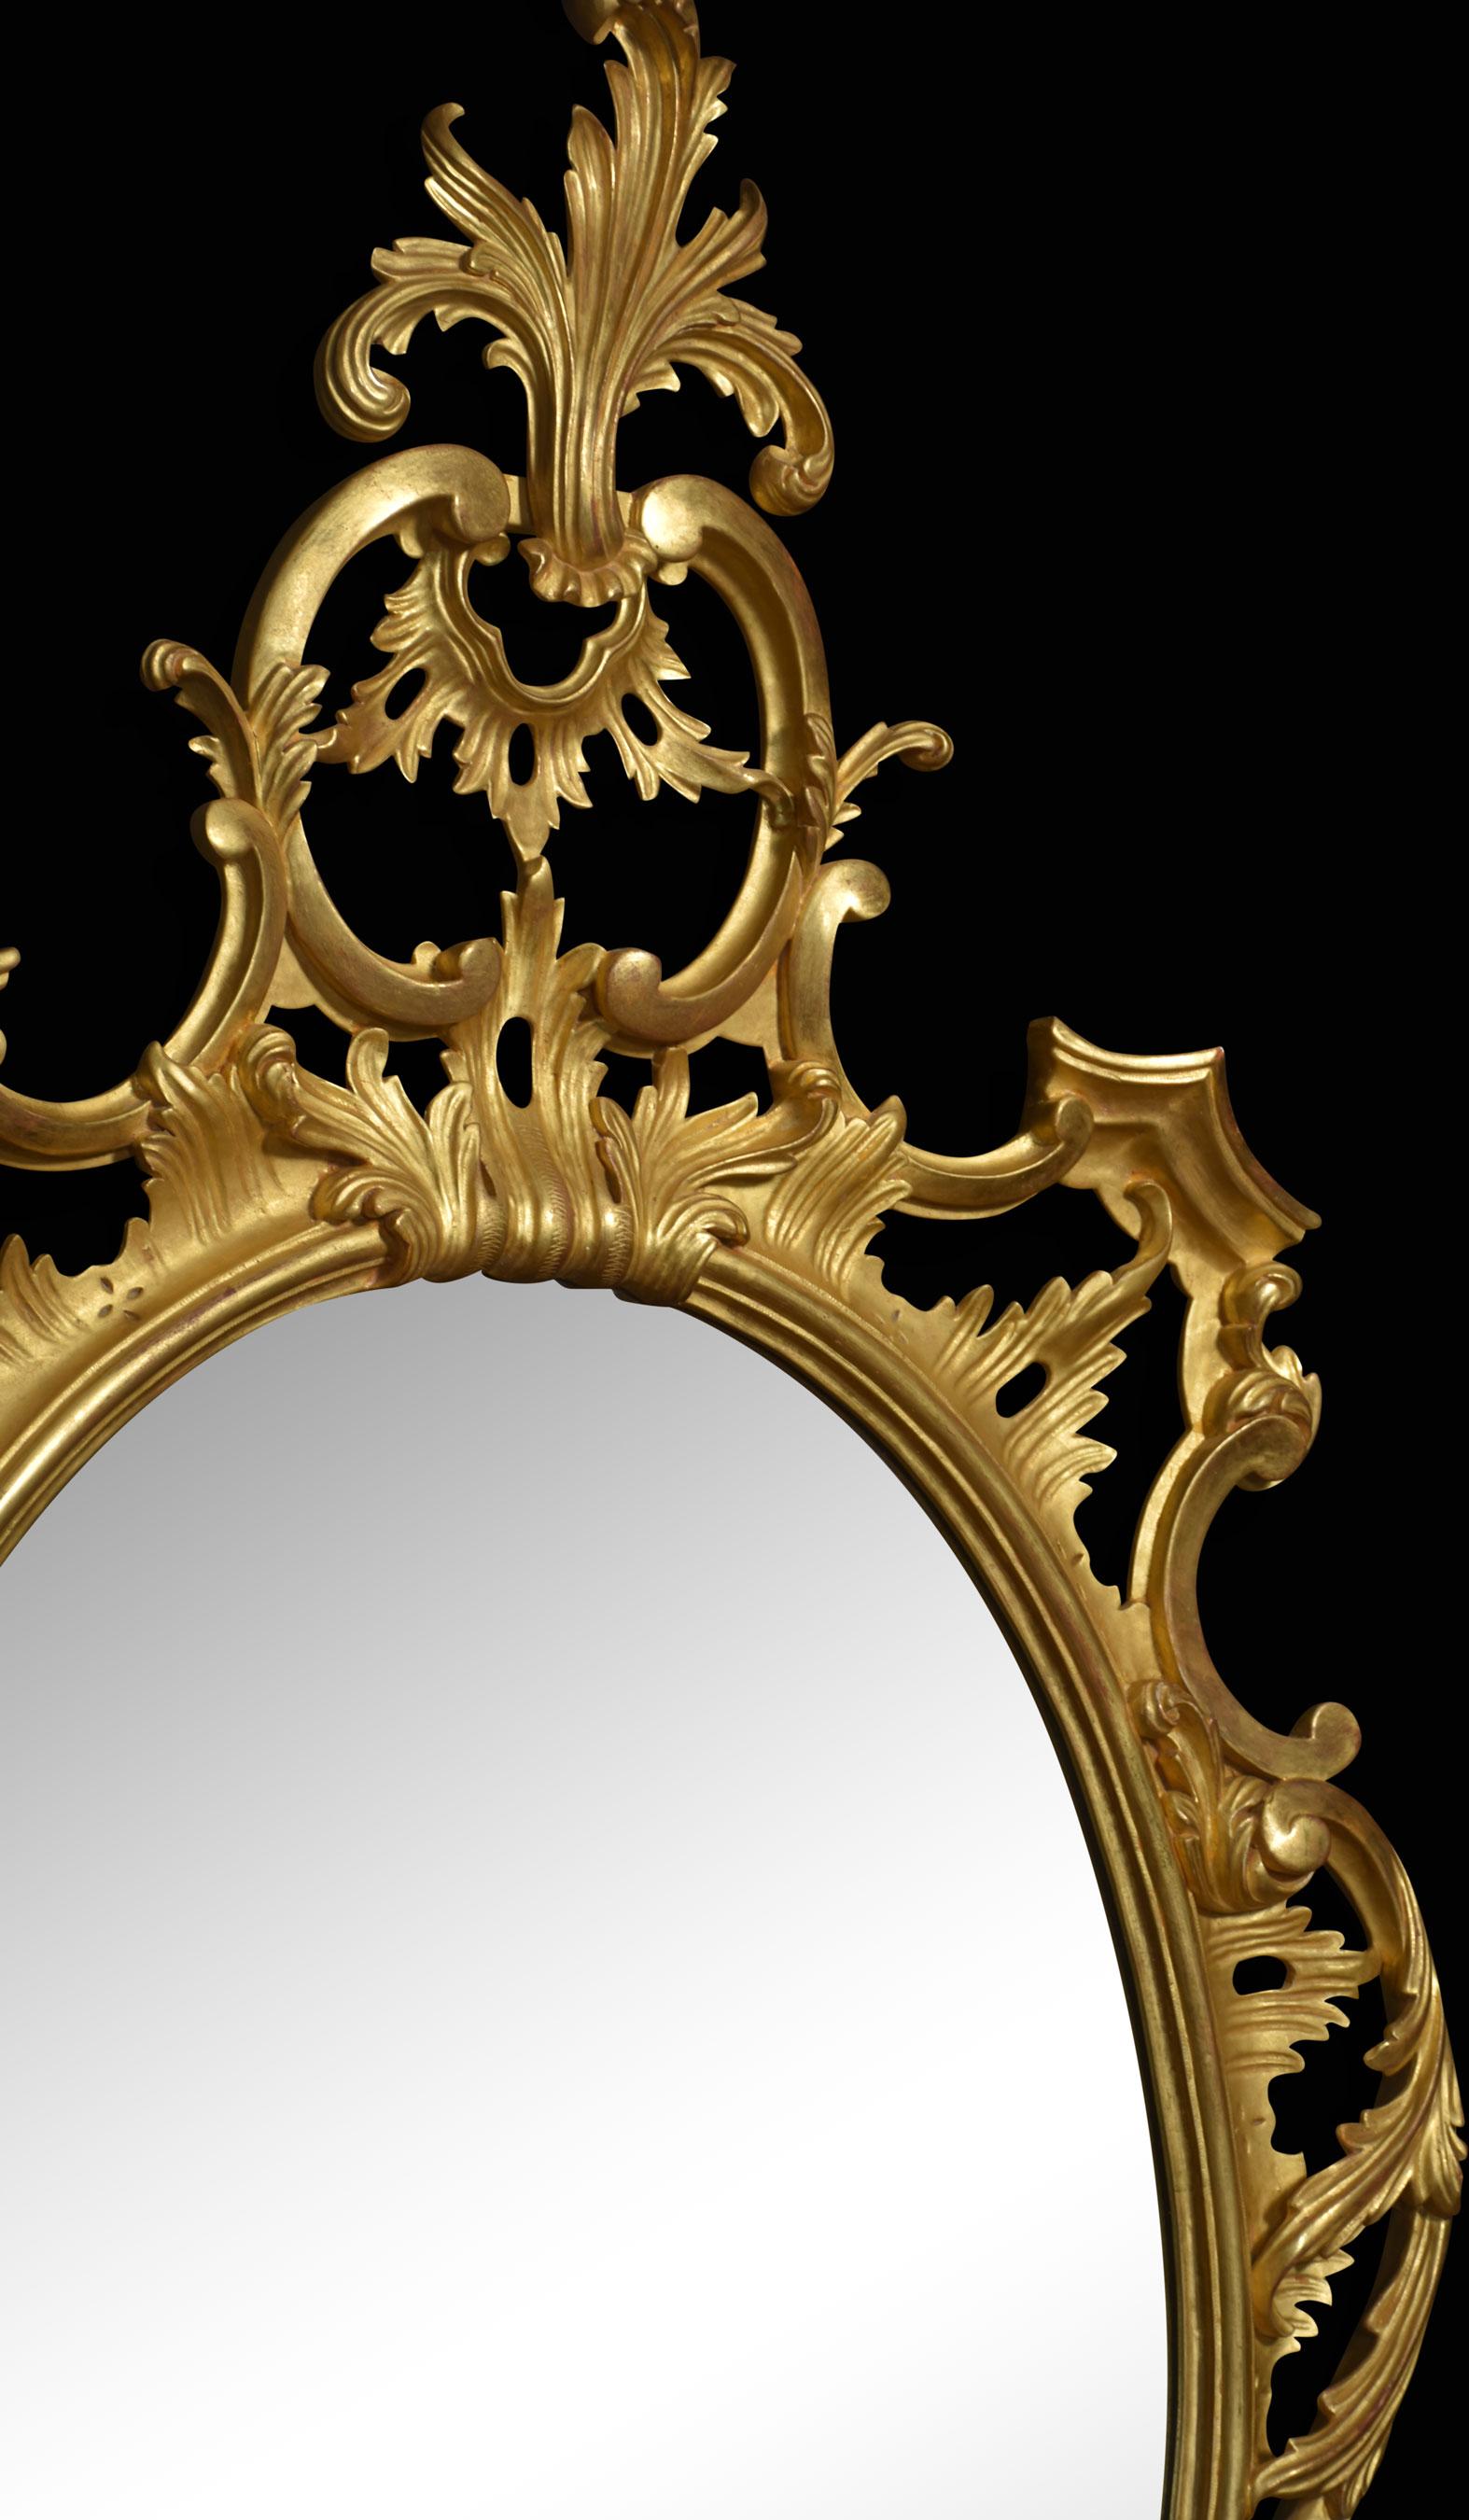 Carved gilt-wood oval wall mirror For Sale 1